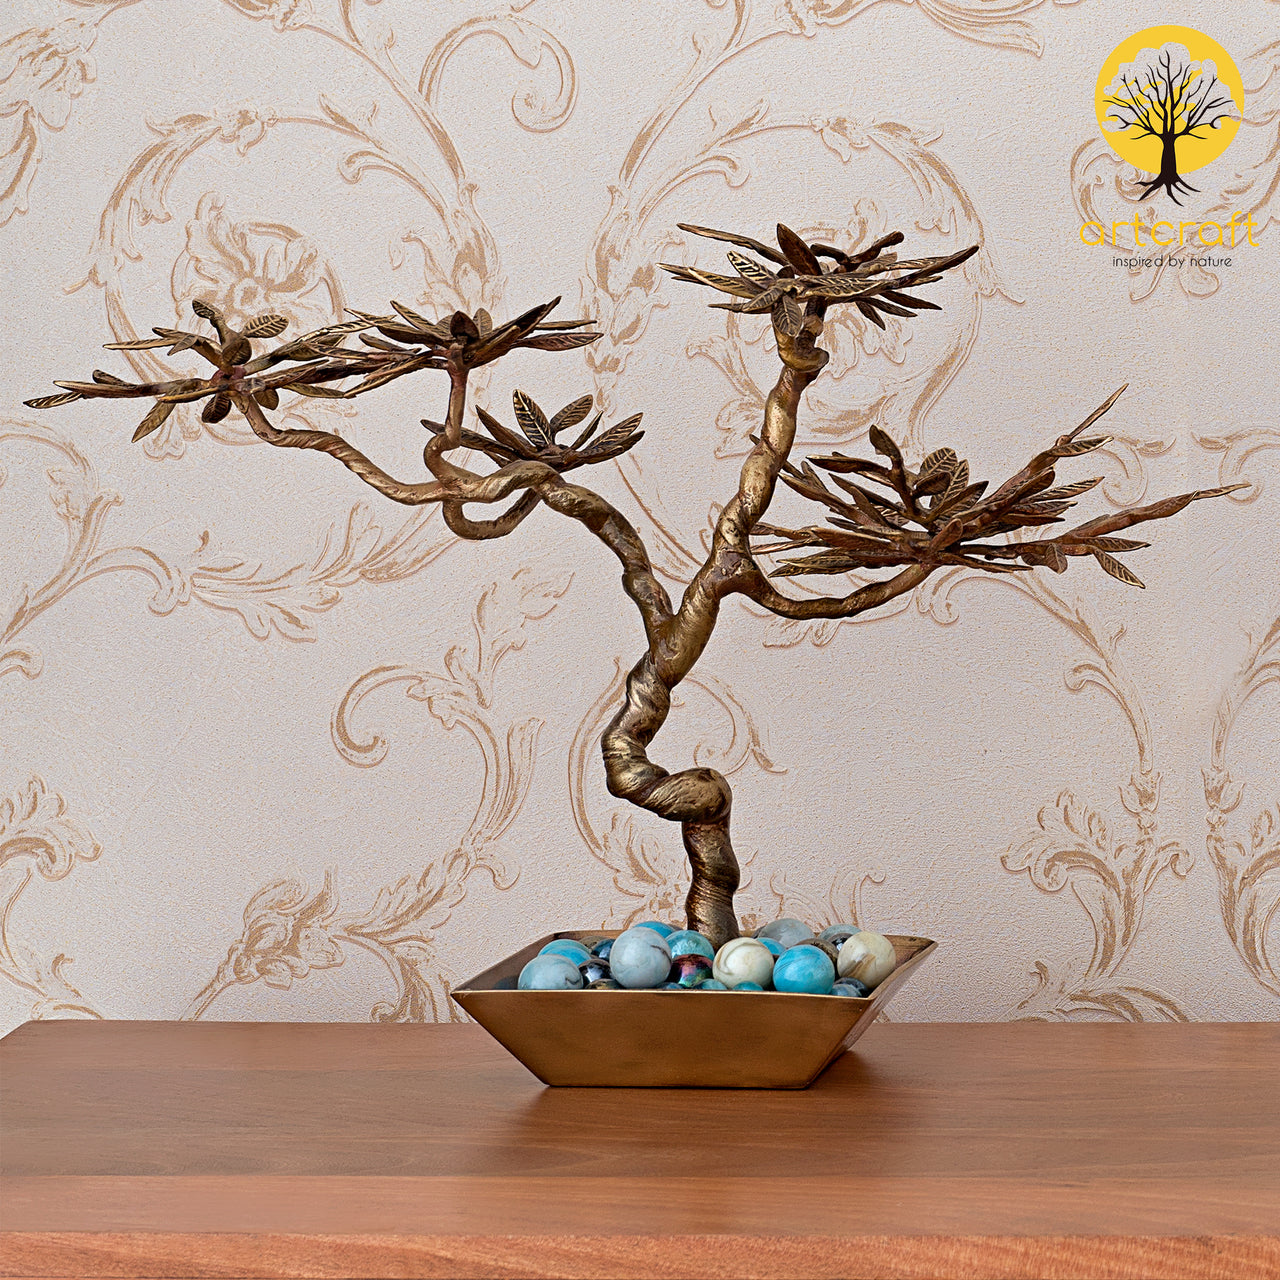 Bonsai Tree - Table Top Art - 100% Made With Pure Brass